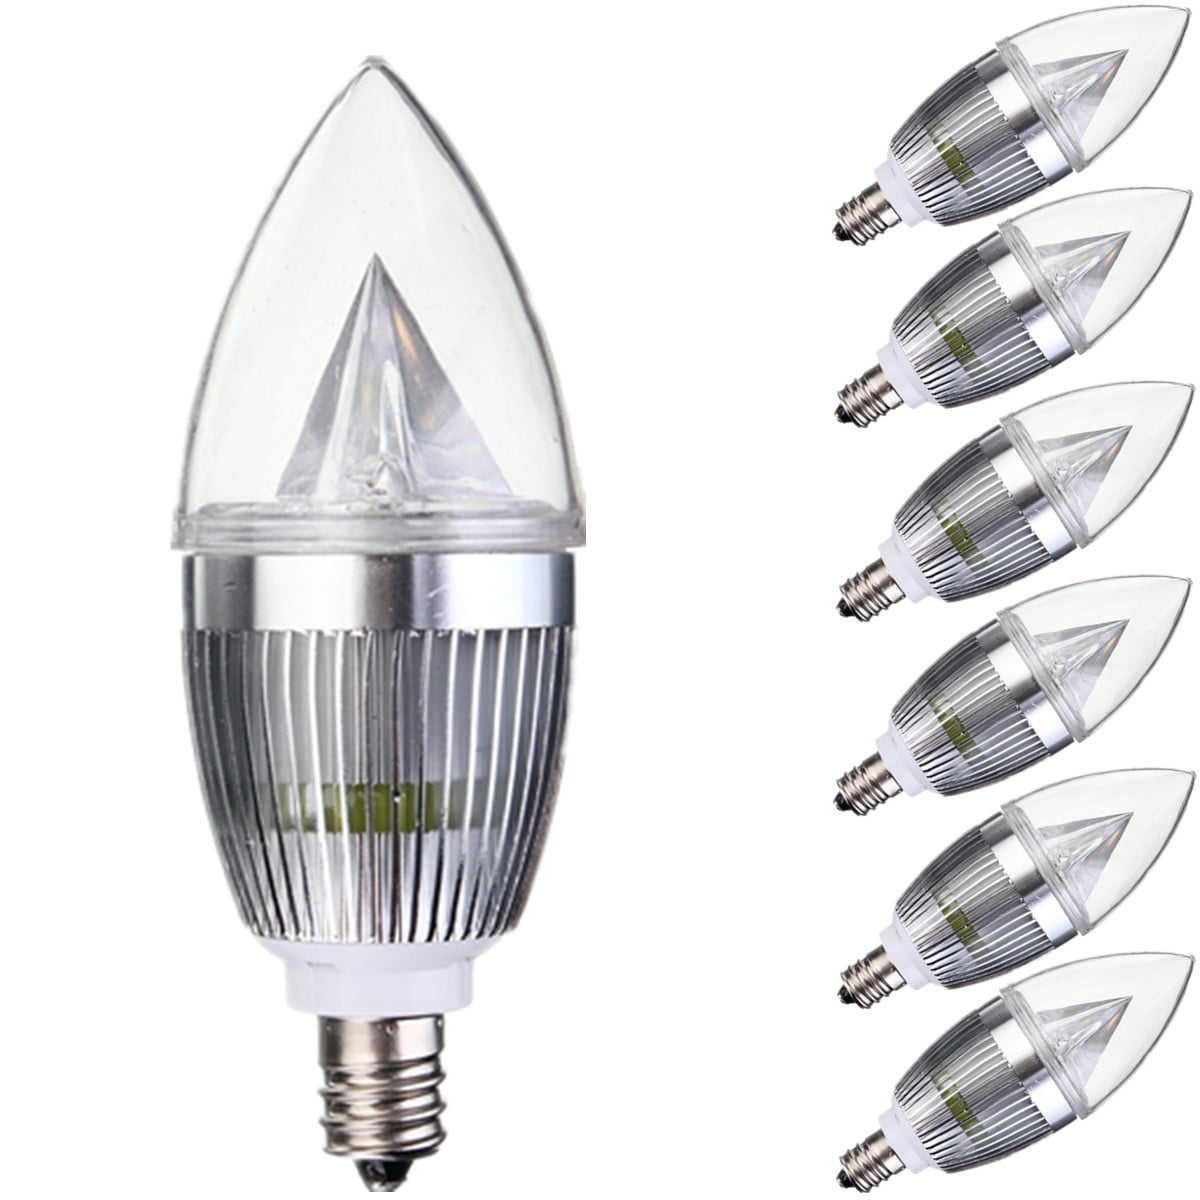 Excellent 1x 3W E27 Chandelier Candle Light Bulb Lamp 3500K Warm White Cover Coffee Shop Dining Room Lighting 